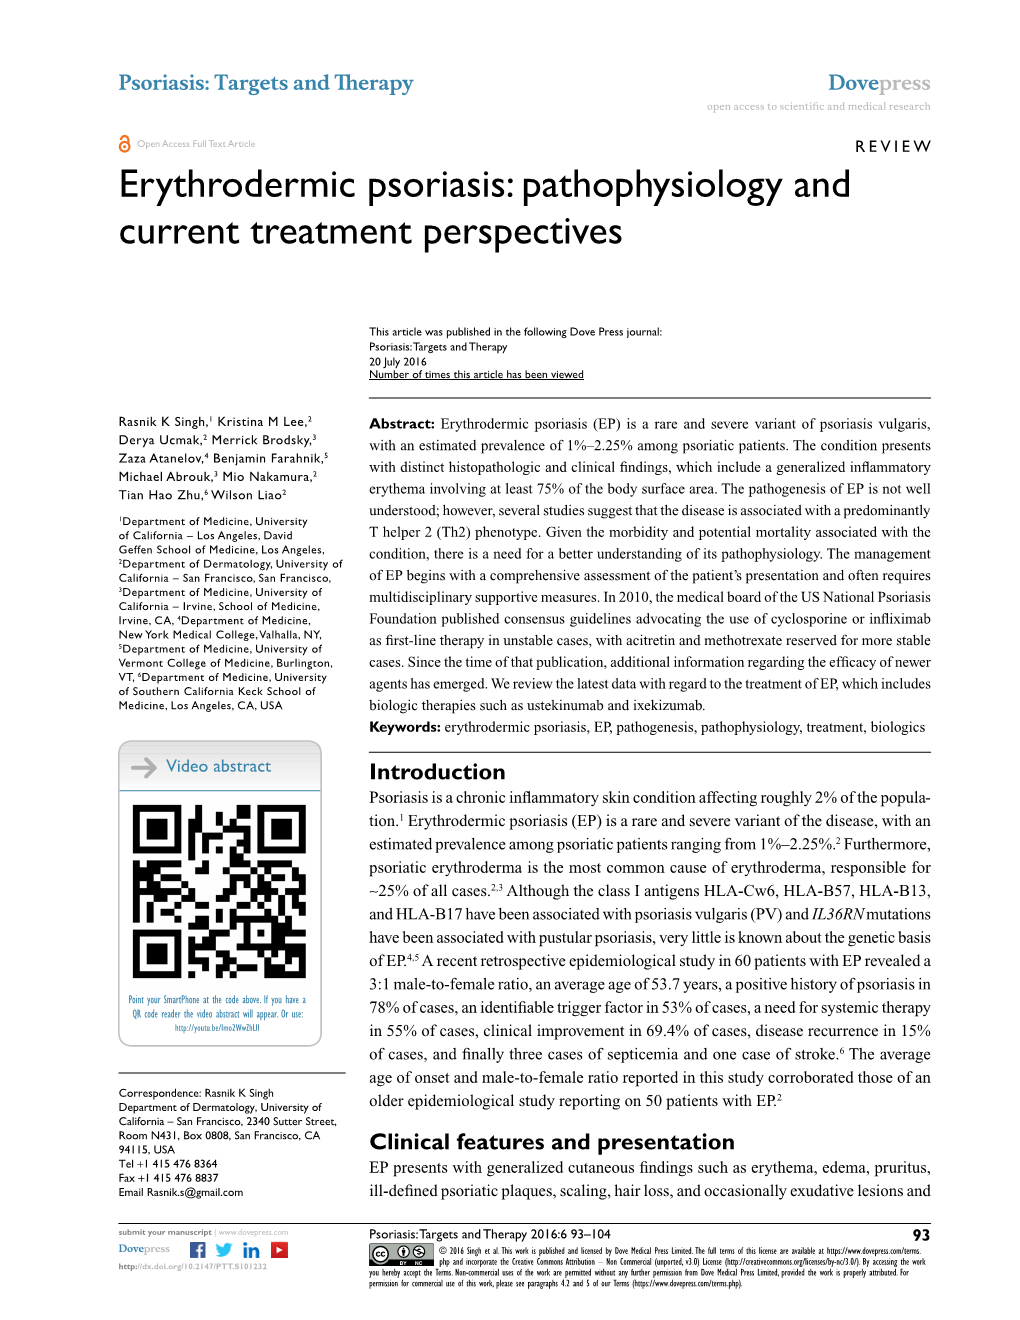 Erythrodermic Psoriasis: Pathophysiology and Current Treatment Perspectives